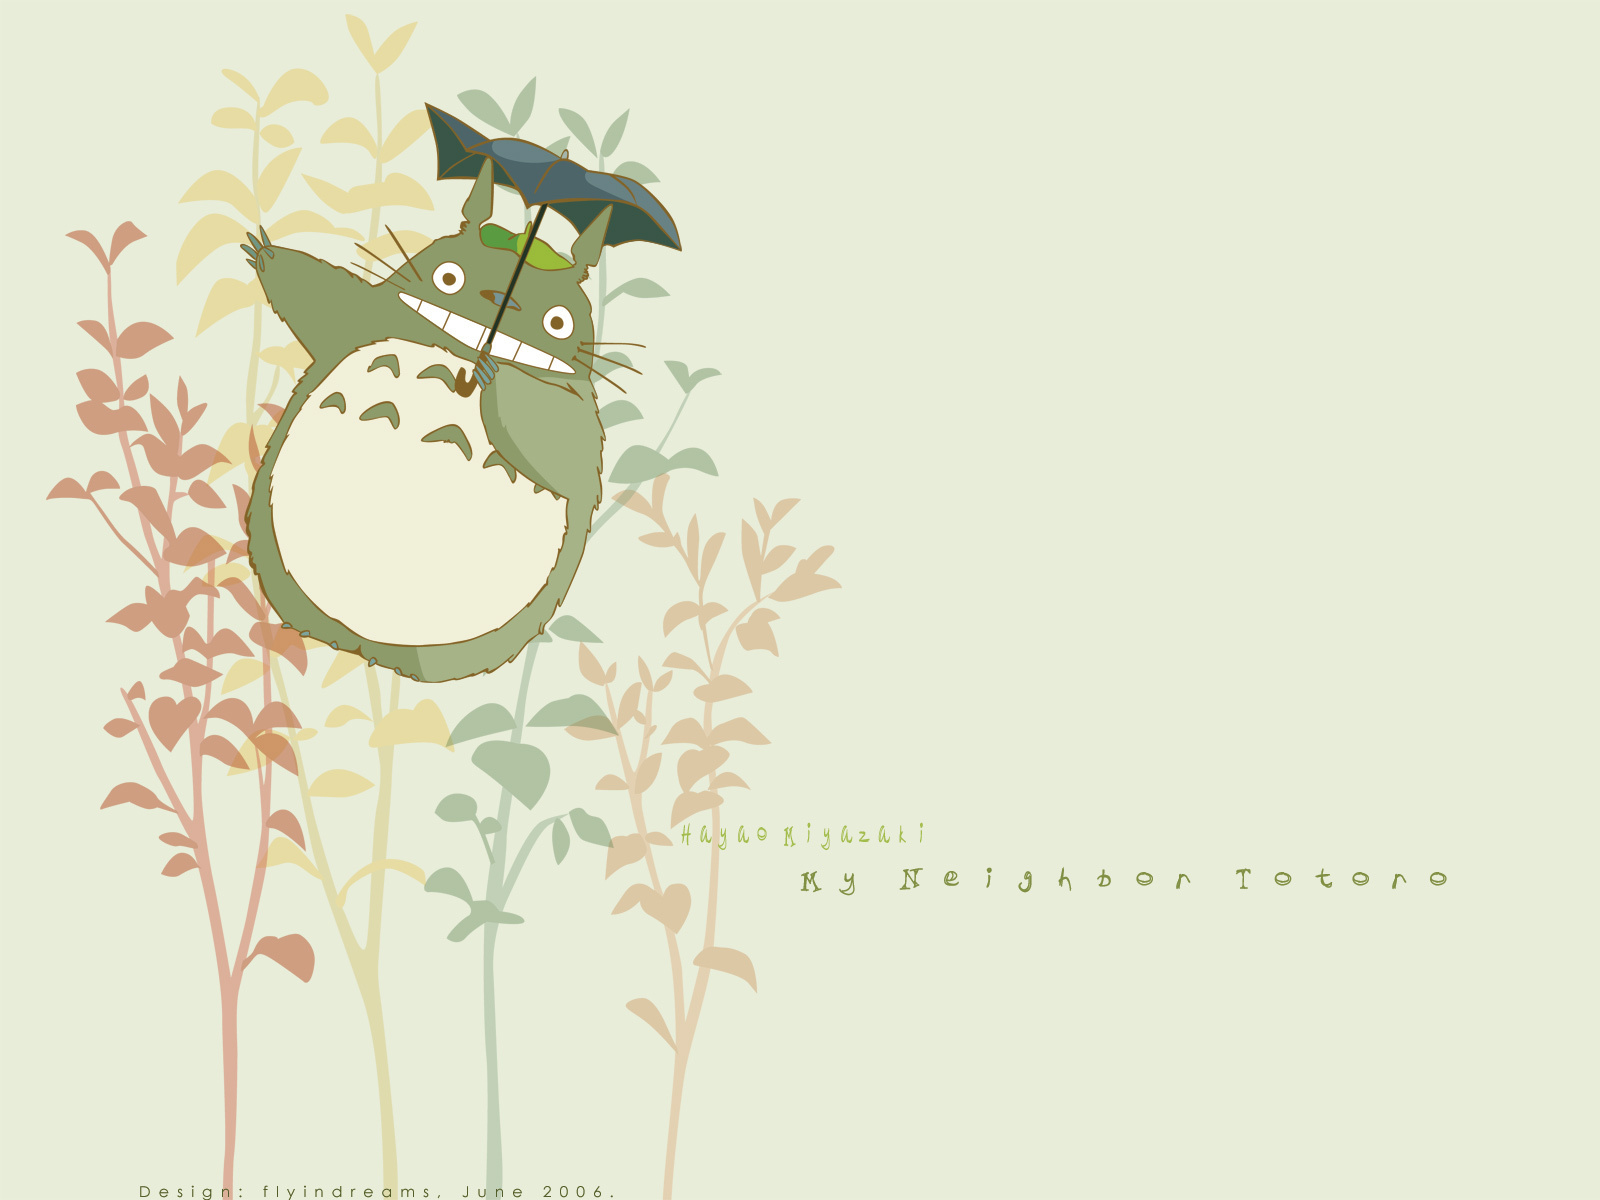 My Neighbor Totoro Image HD Wallpaper And Background Photos